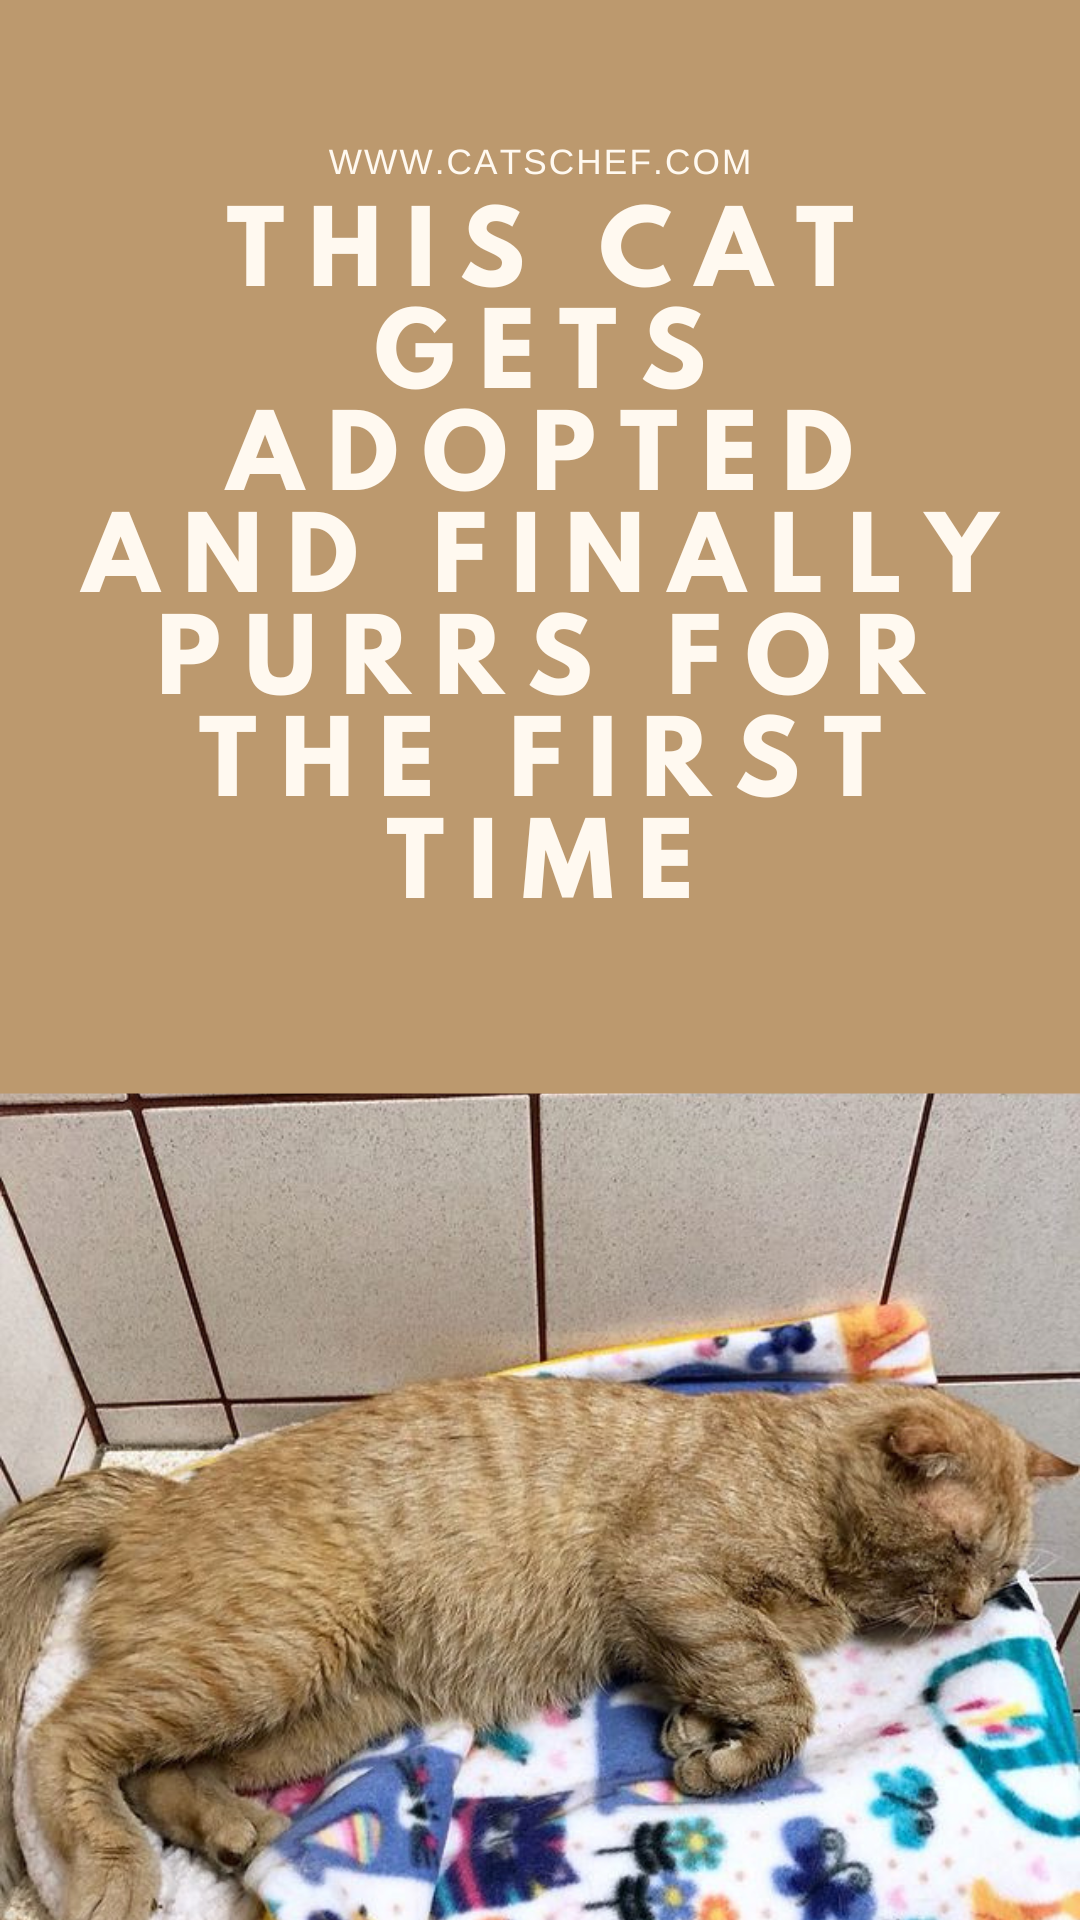 This Cat Gets Adopted And Finally Purrs For The First Time